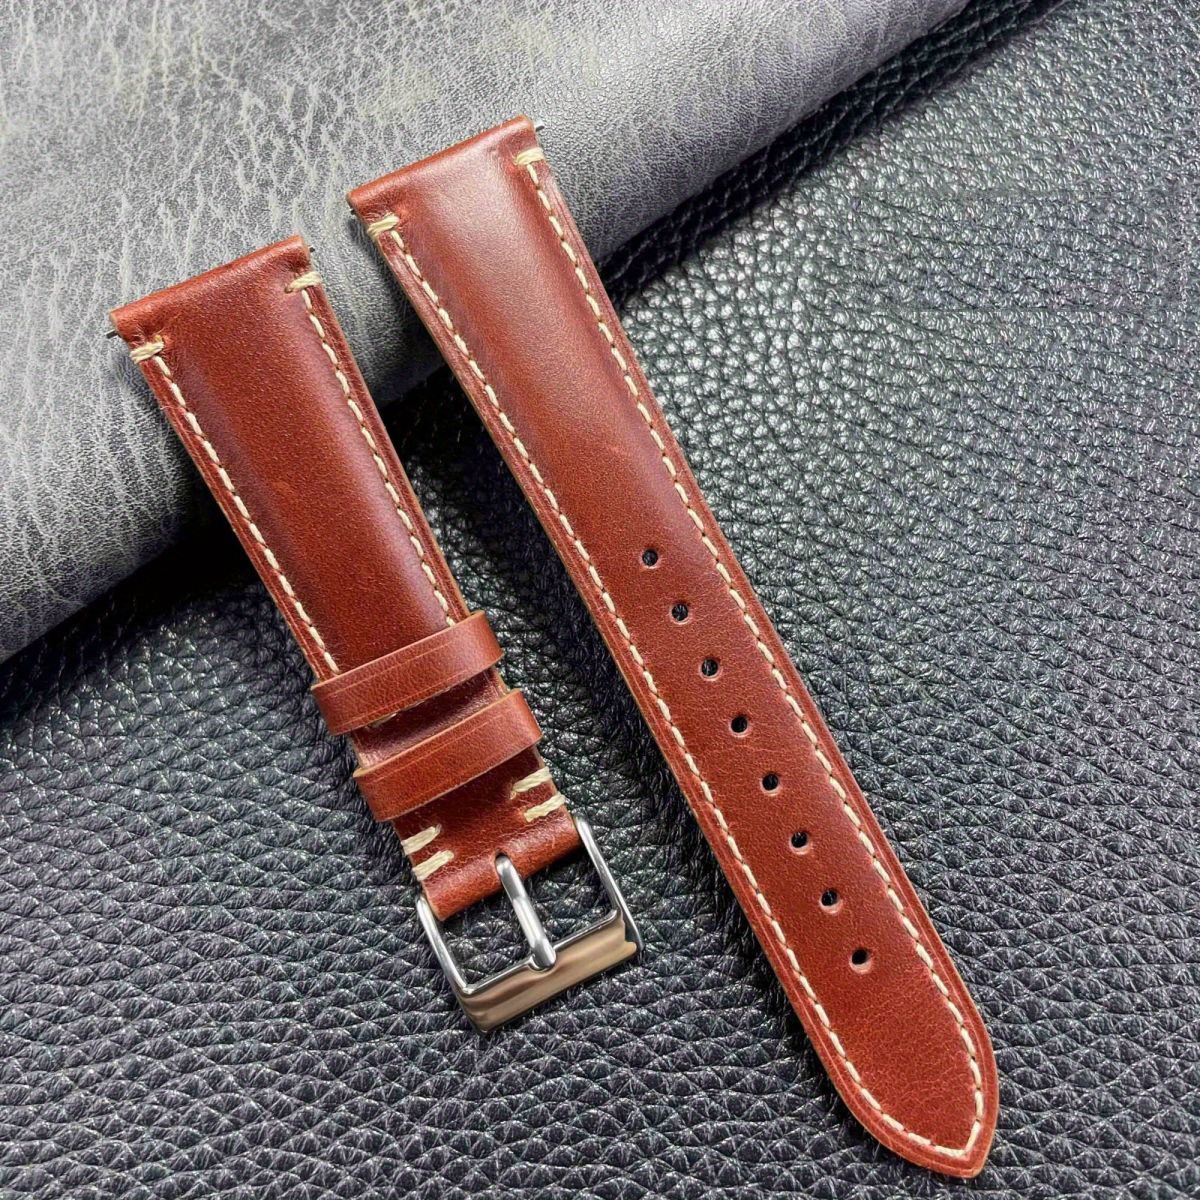 Genuine Leather Chain Strap High-quality Leather Strap With 